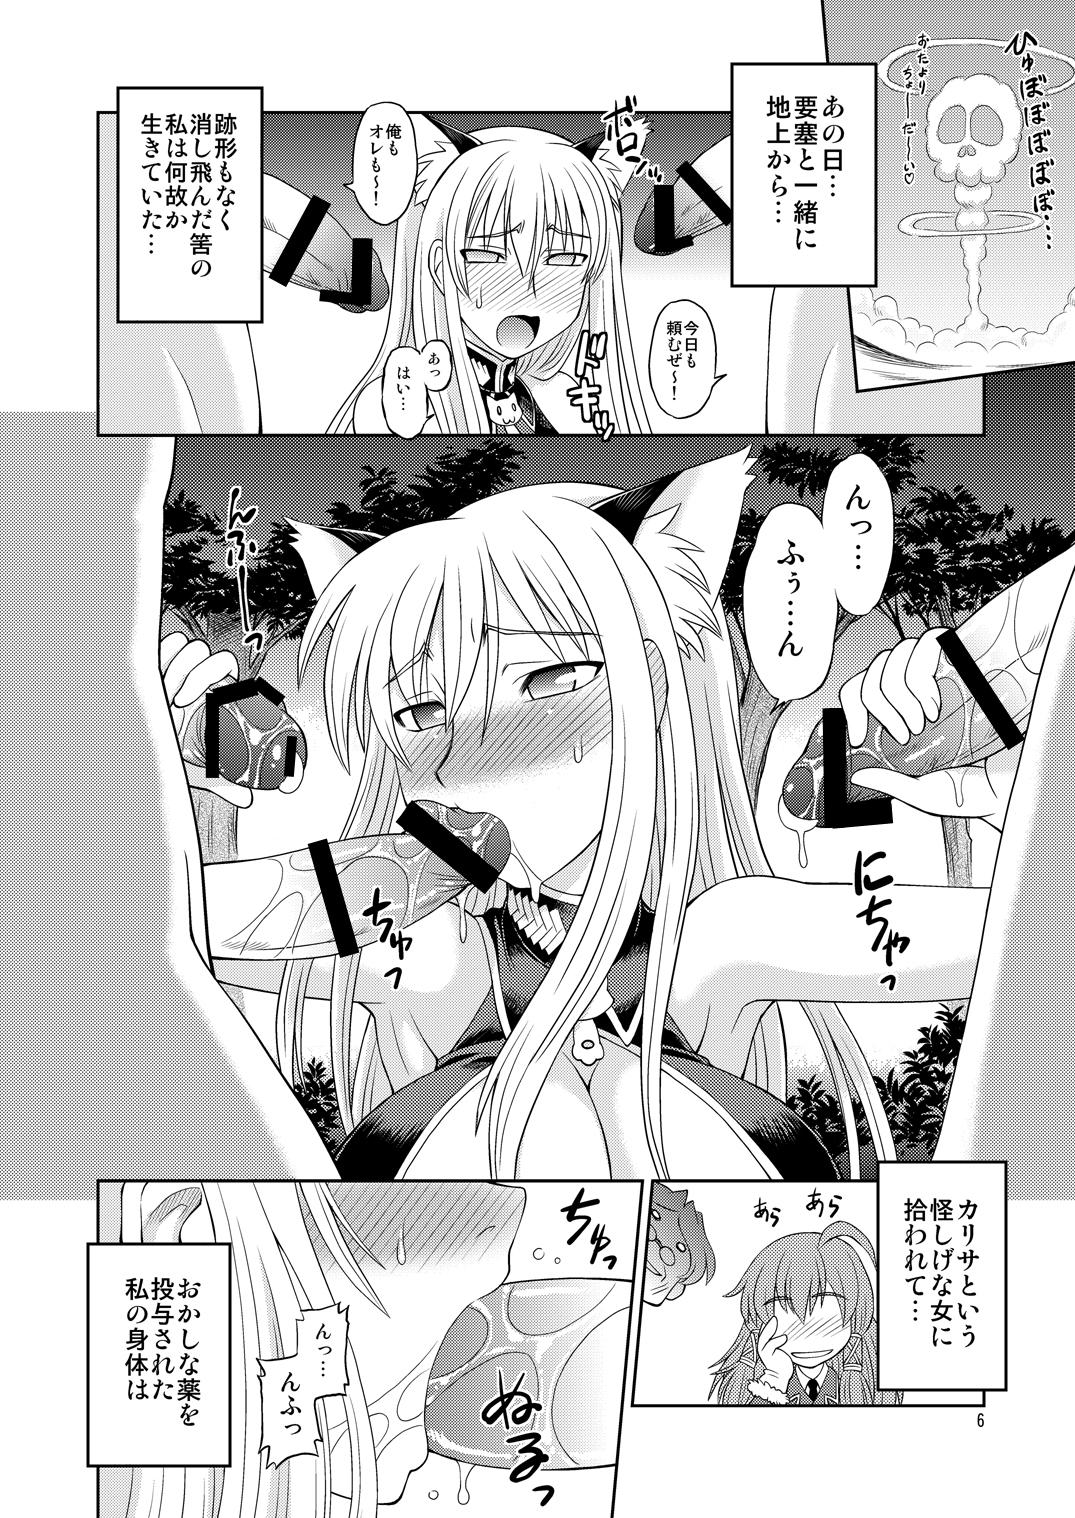 Latex Selvaria Oppai - Valkyria chronicles Gay Blondhair - Page 5